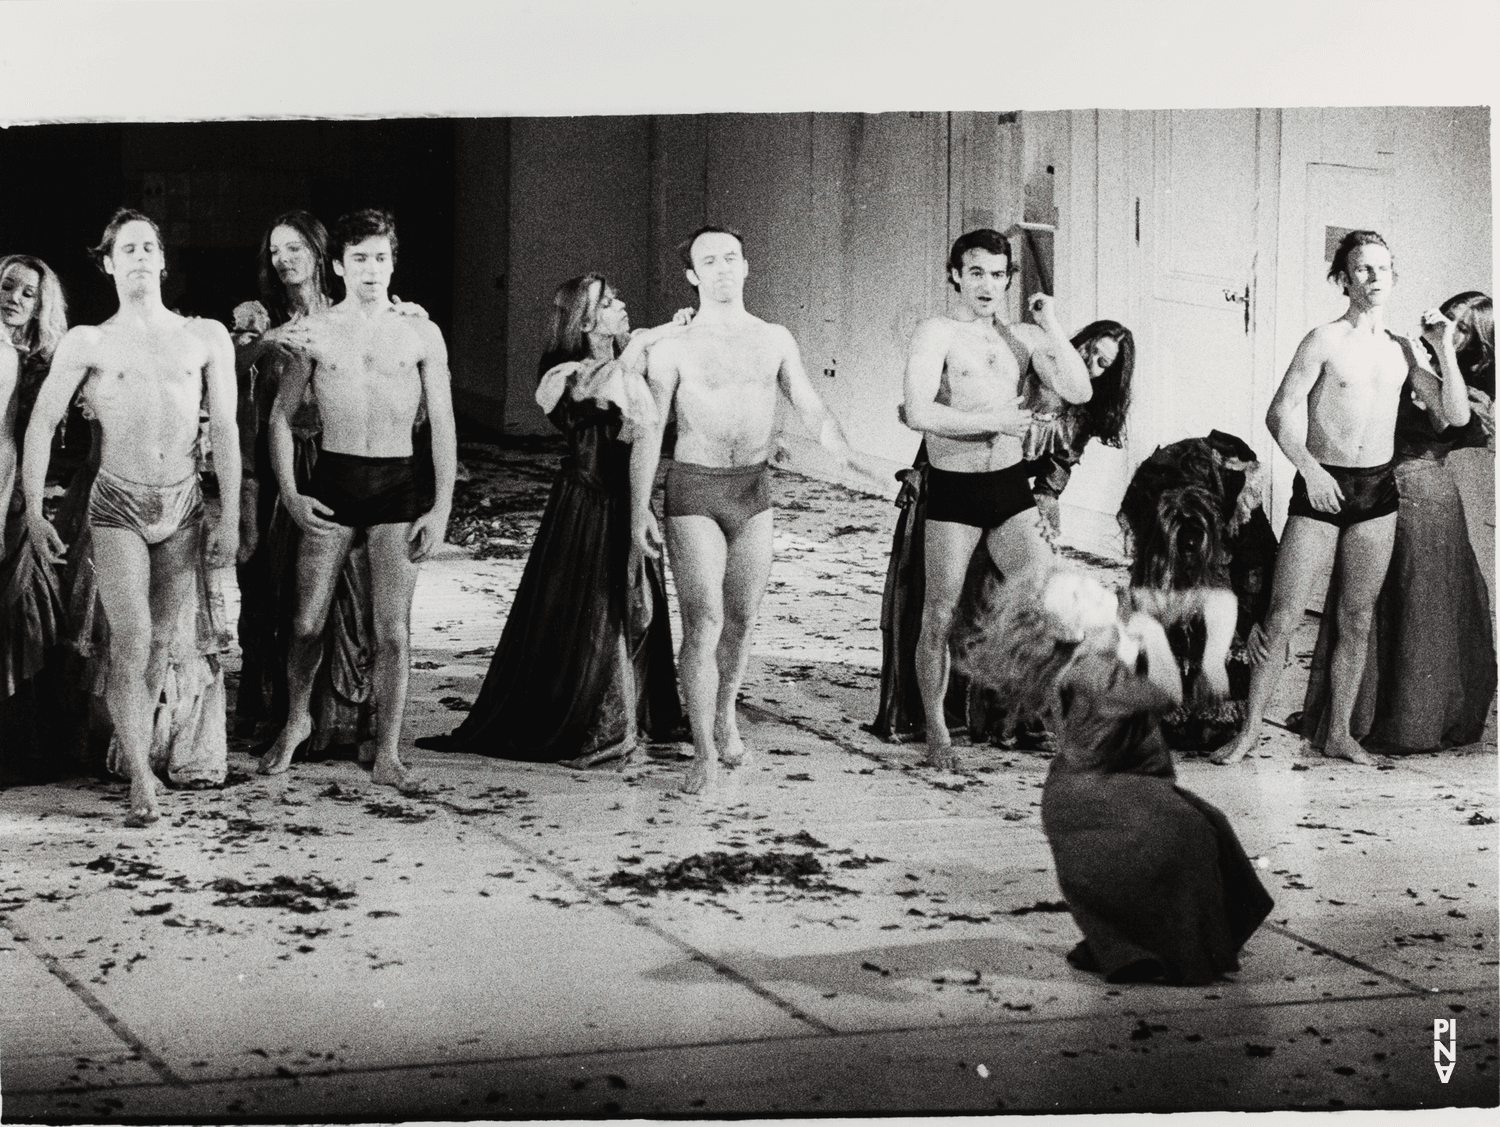 “Bluebeard. While Listening to a Tape Recording of Béla Bartók's Opera "Duke Bluebeard's Castle"” by Pina Bausch